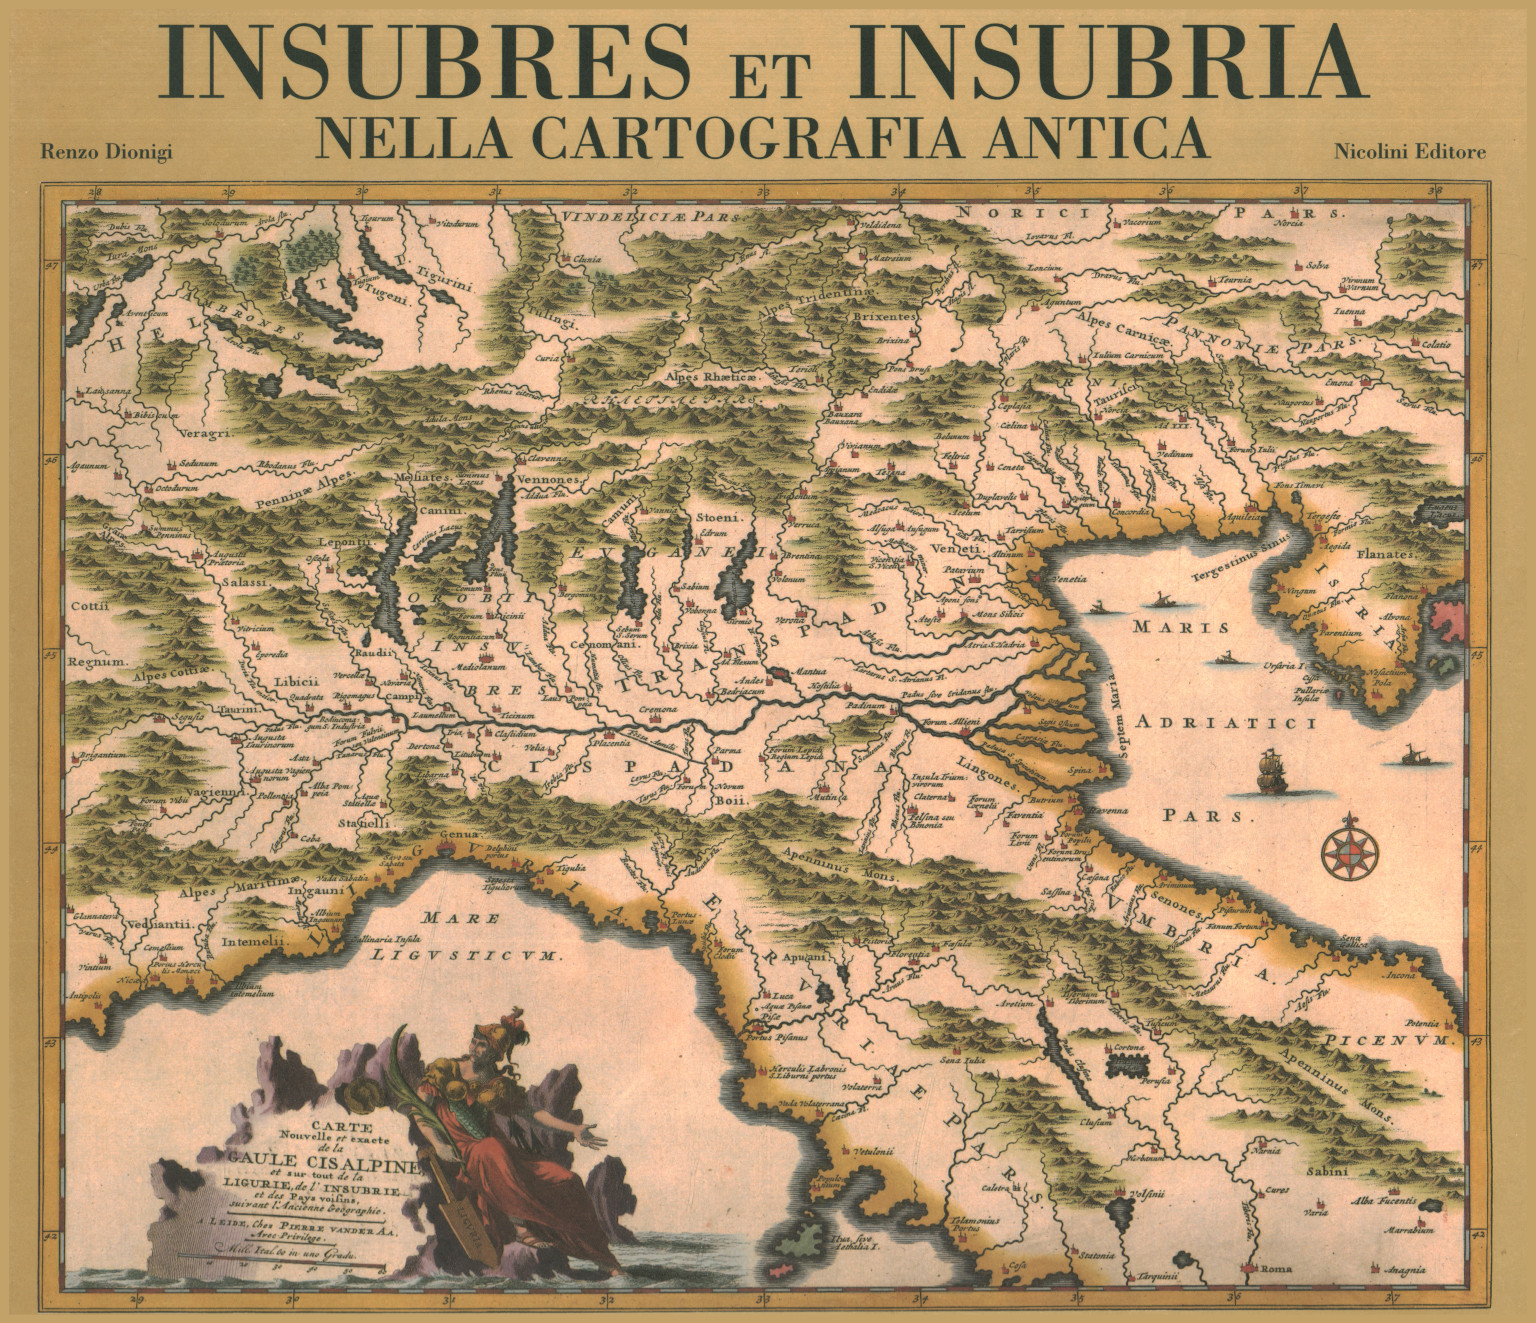 Insubres et Insubria in cartography a